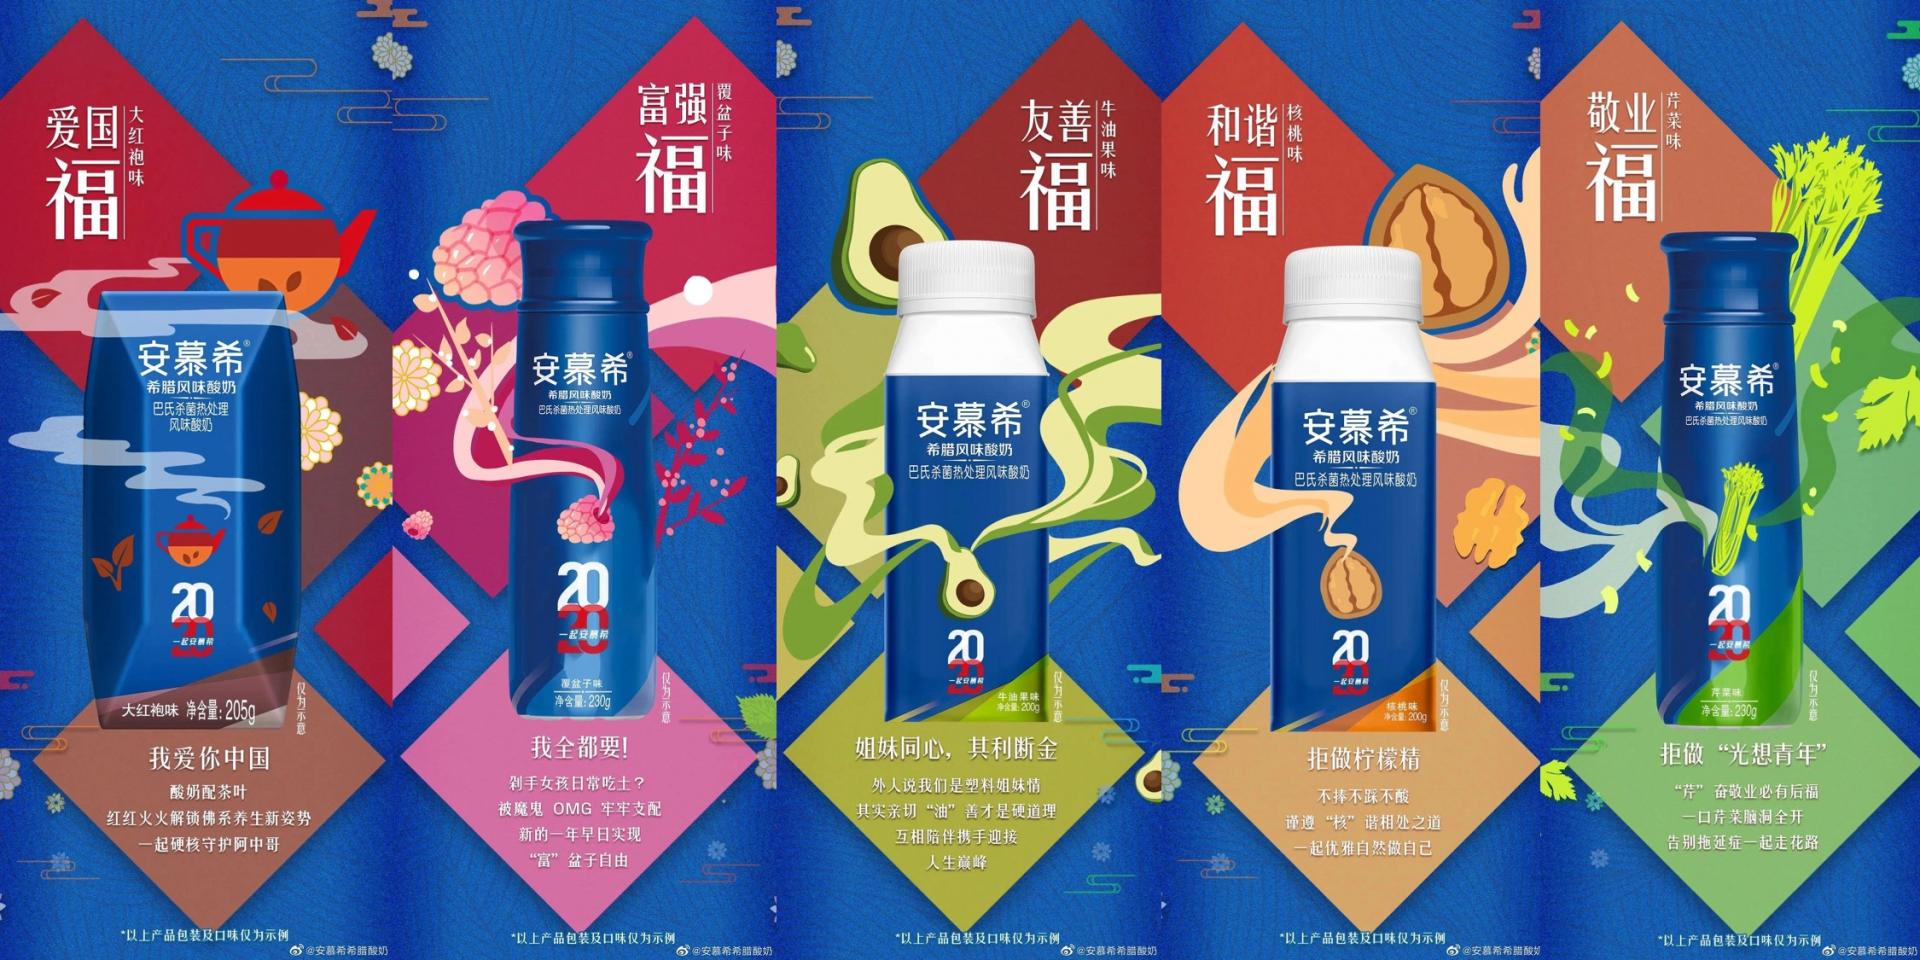 AMBROSIAL’s 5 new flavored yogurts launched during 2020 Spring Festival in China